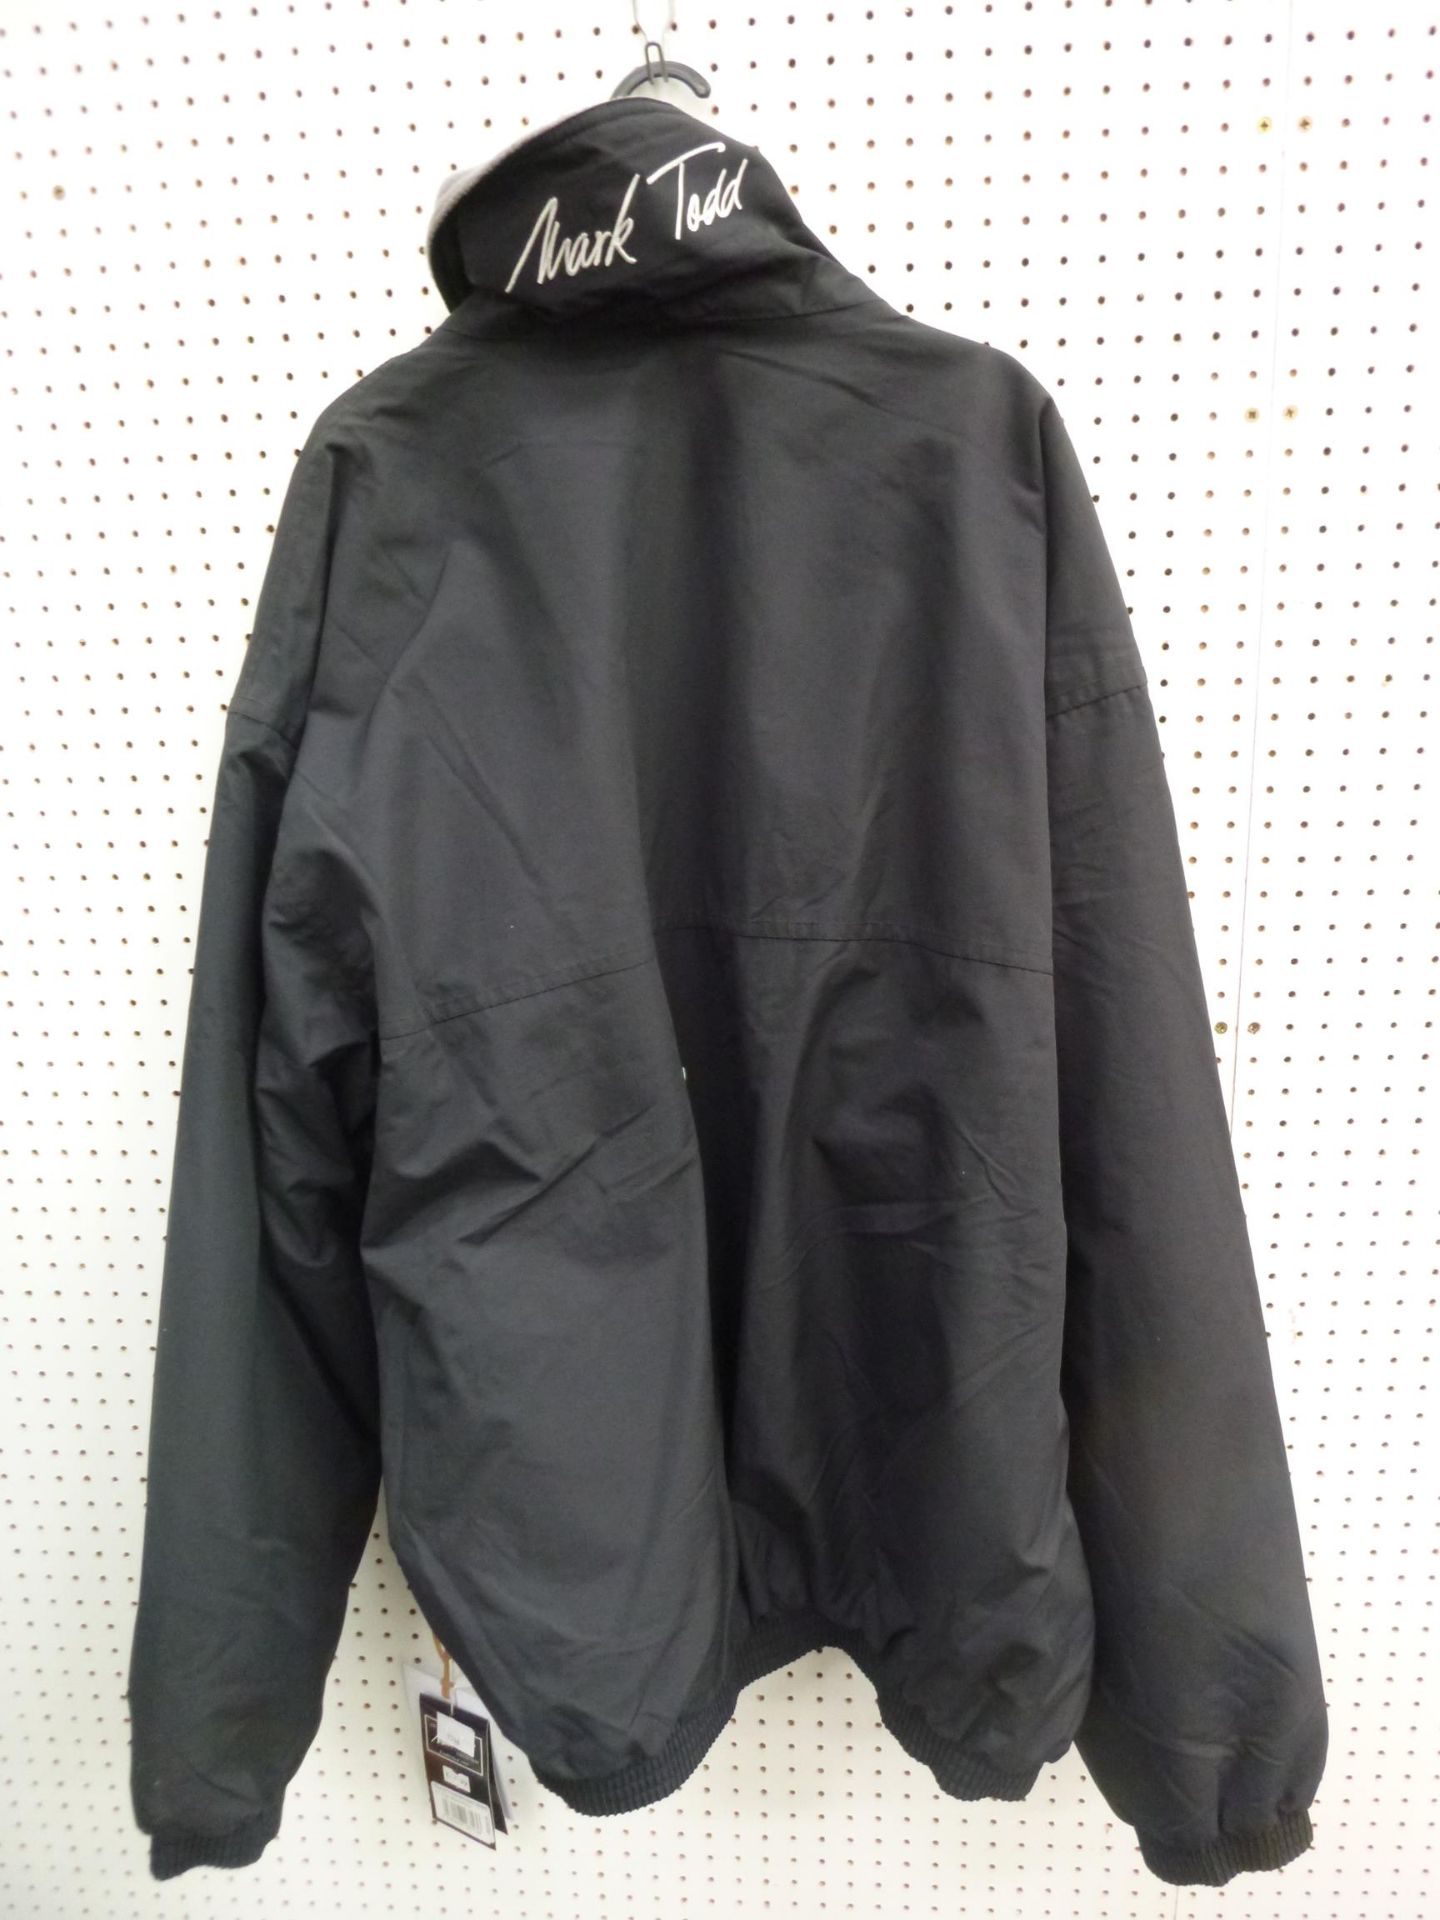 * A New 'Mark Todd' Fleece Lined Blouson Jacket in Black/Grey Size X-Large RRP £47.99 - Image 3 of 3